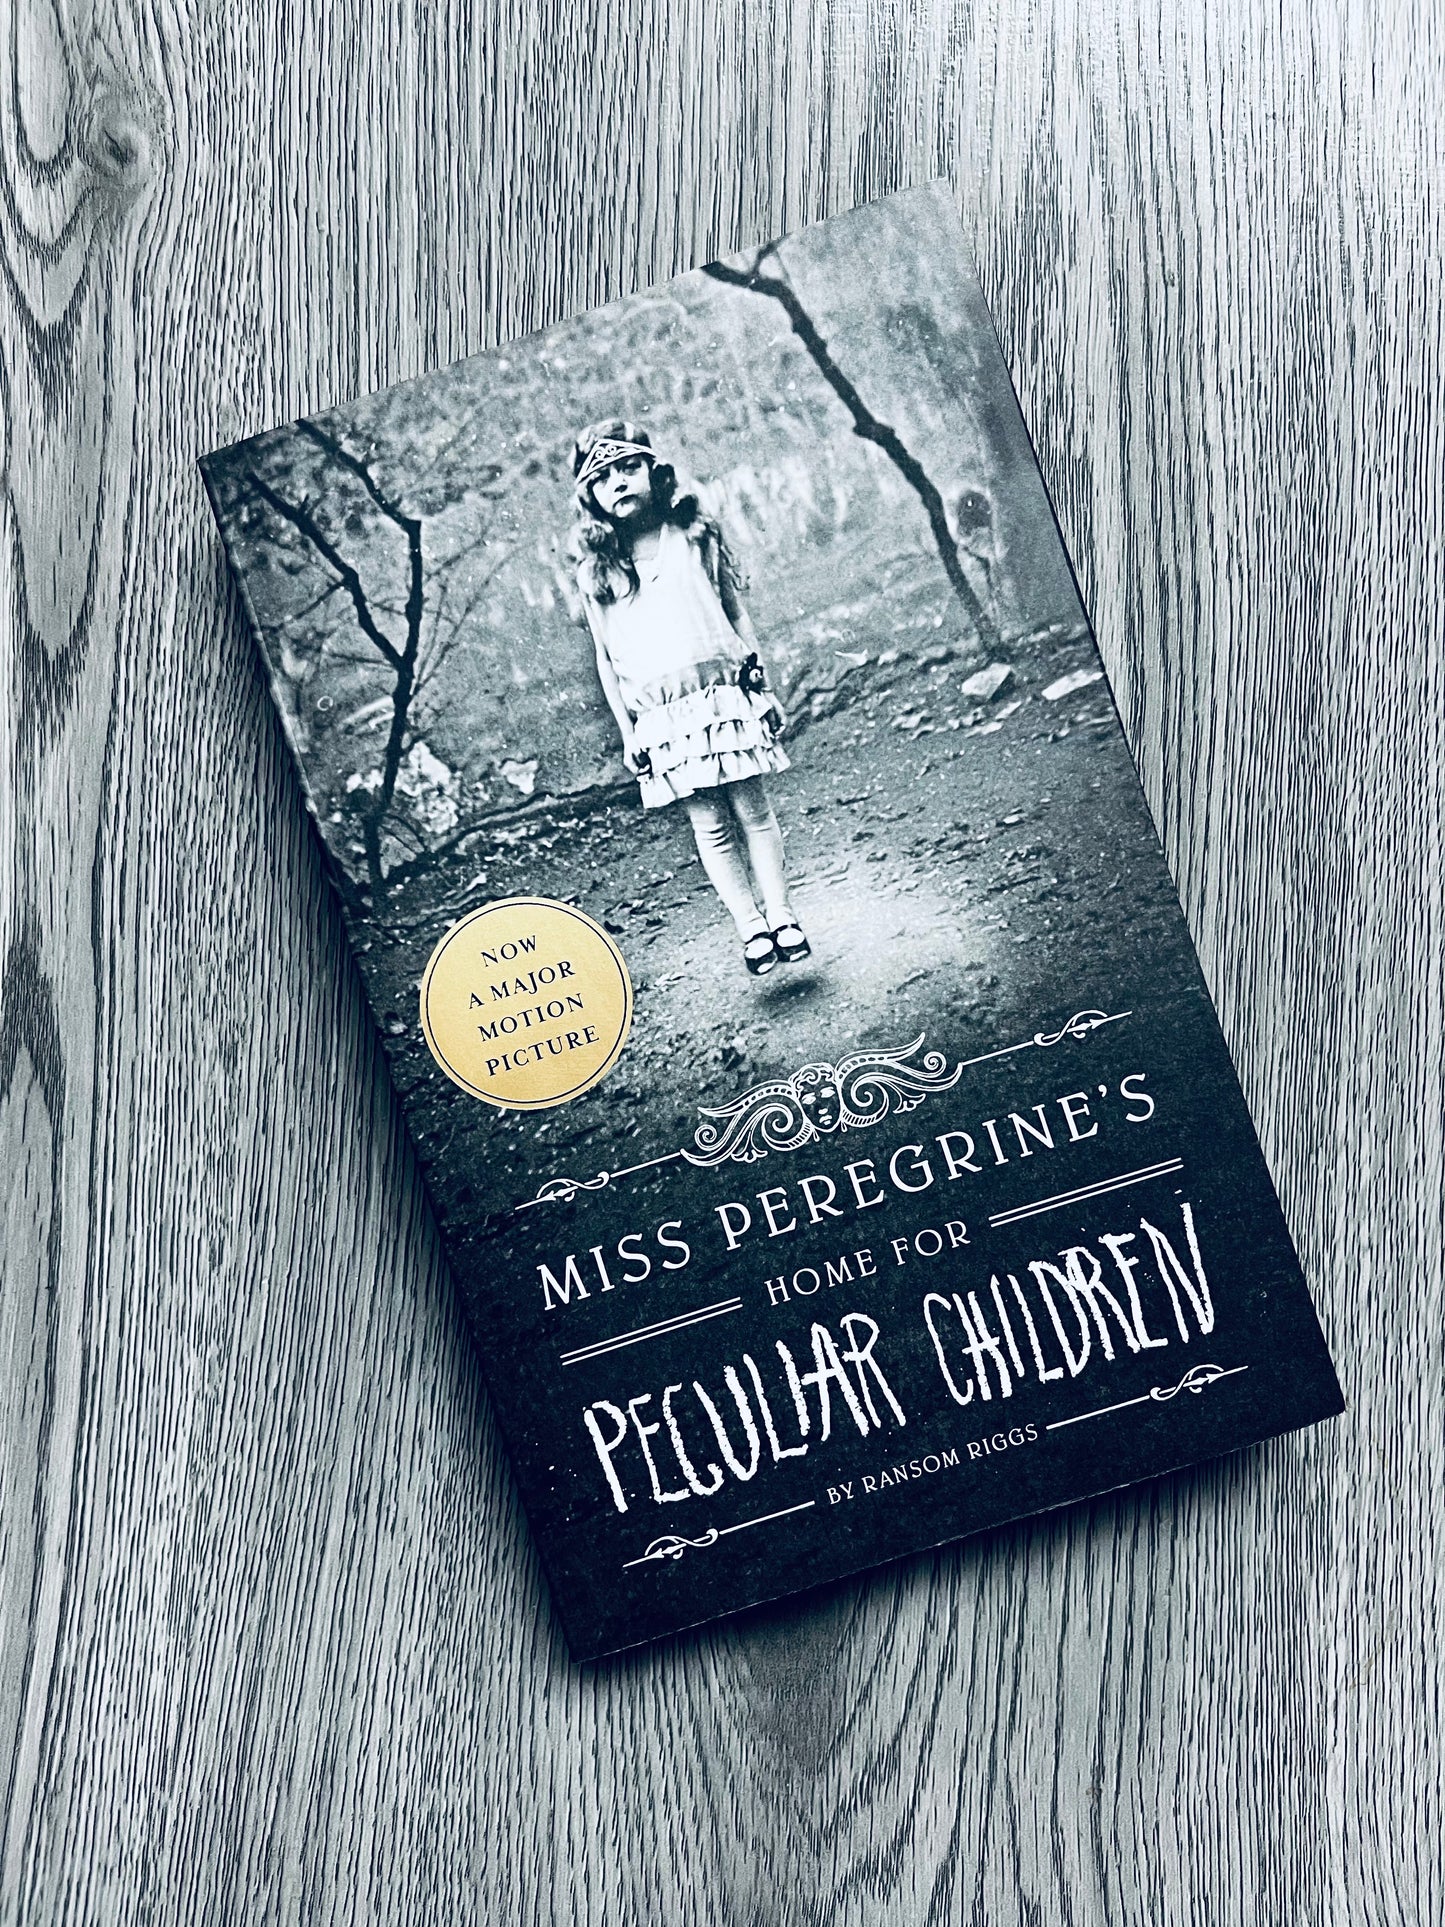 Miss Peregrine's Home for Peculiar Children (Miss Peregine's Peculiar Children #1) by Ransom Riggs